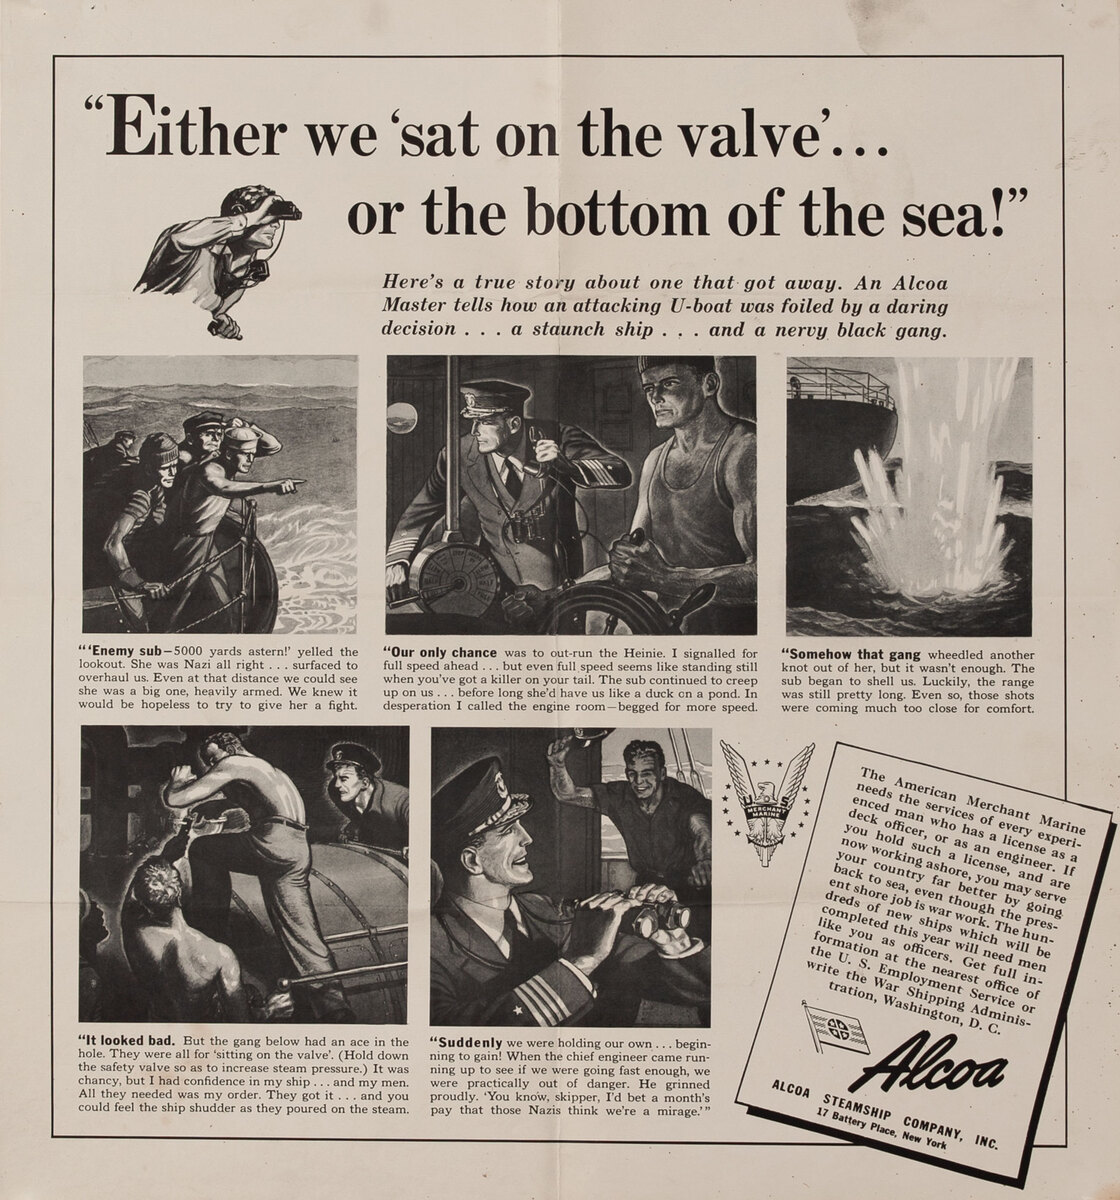 WWII Alcoa Stemaship Company Poster <i>Either we sat on the valve or the botton of the sea!</i>